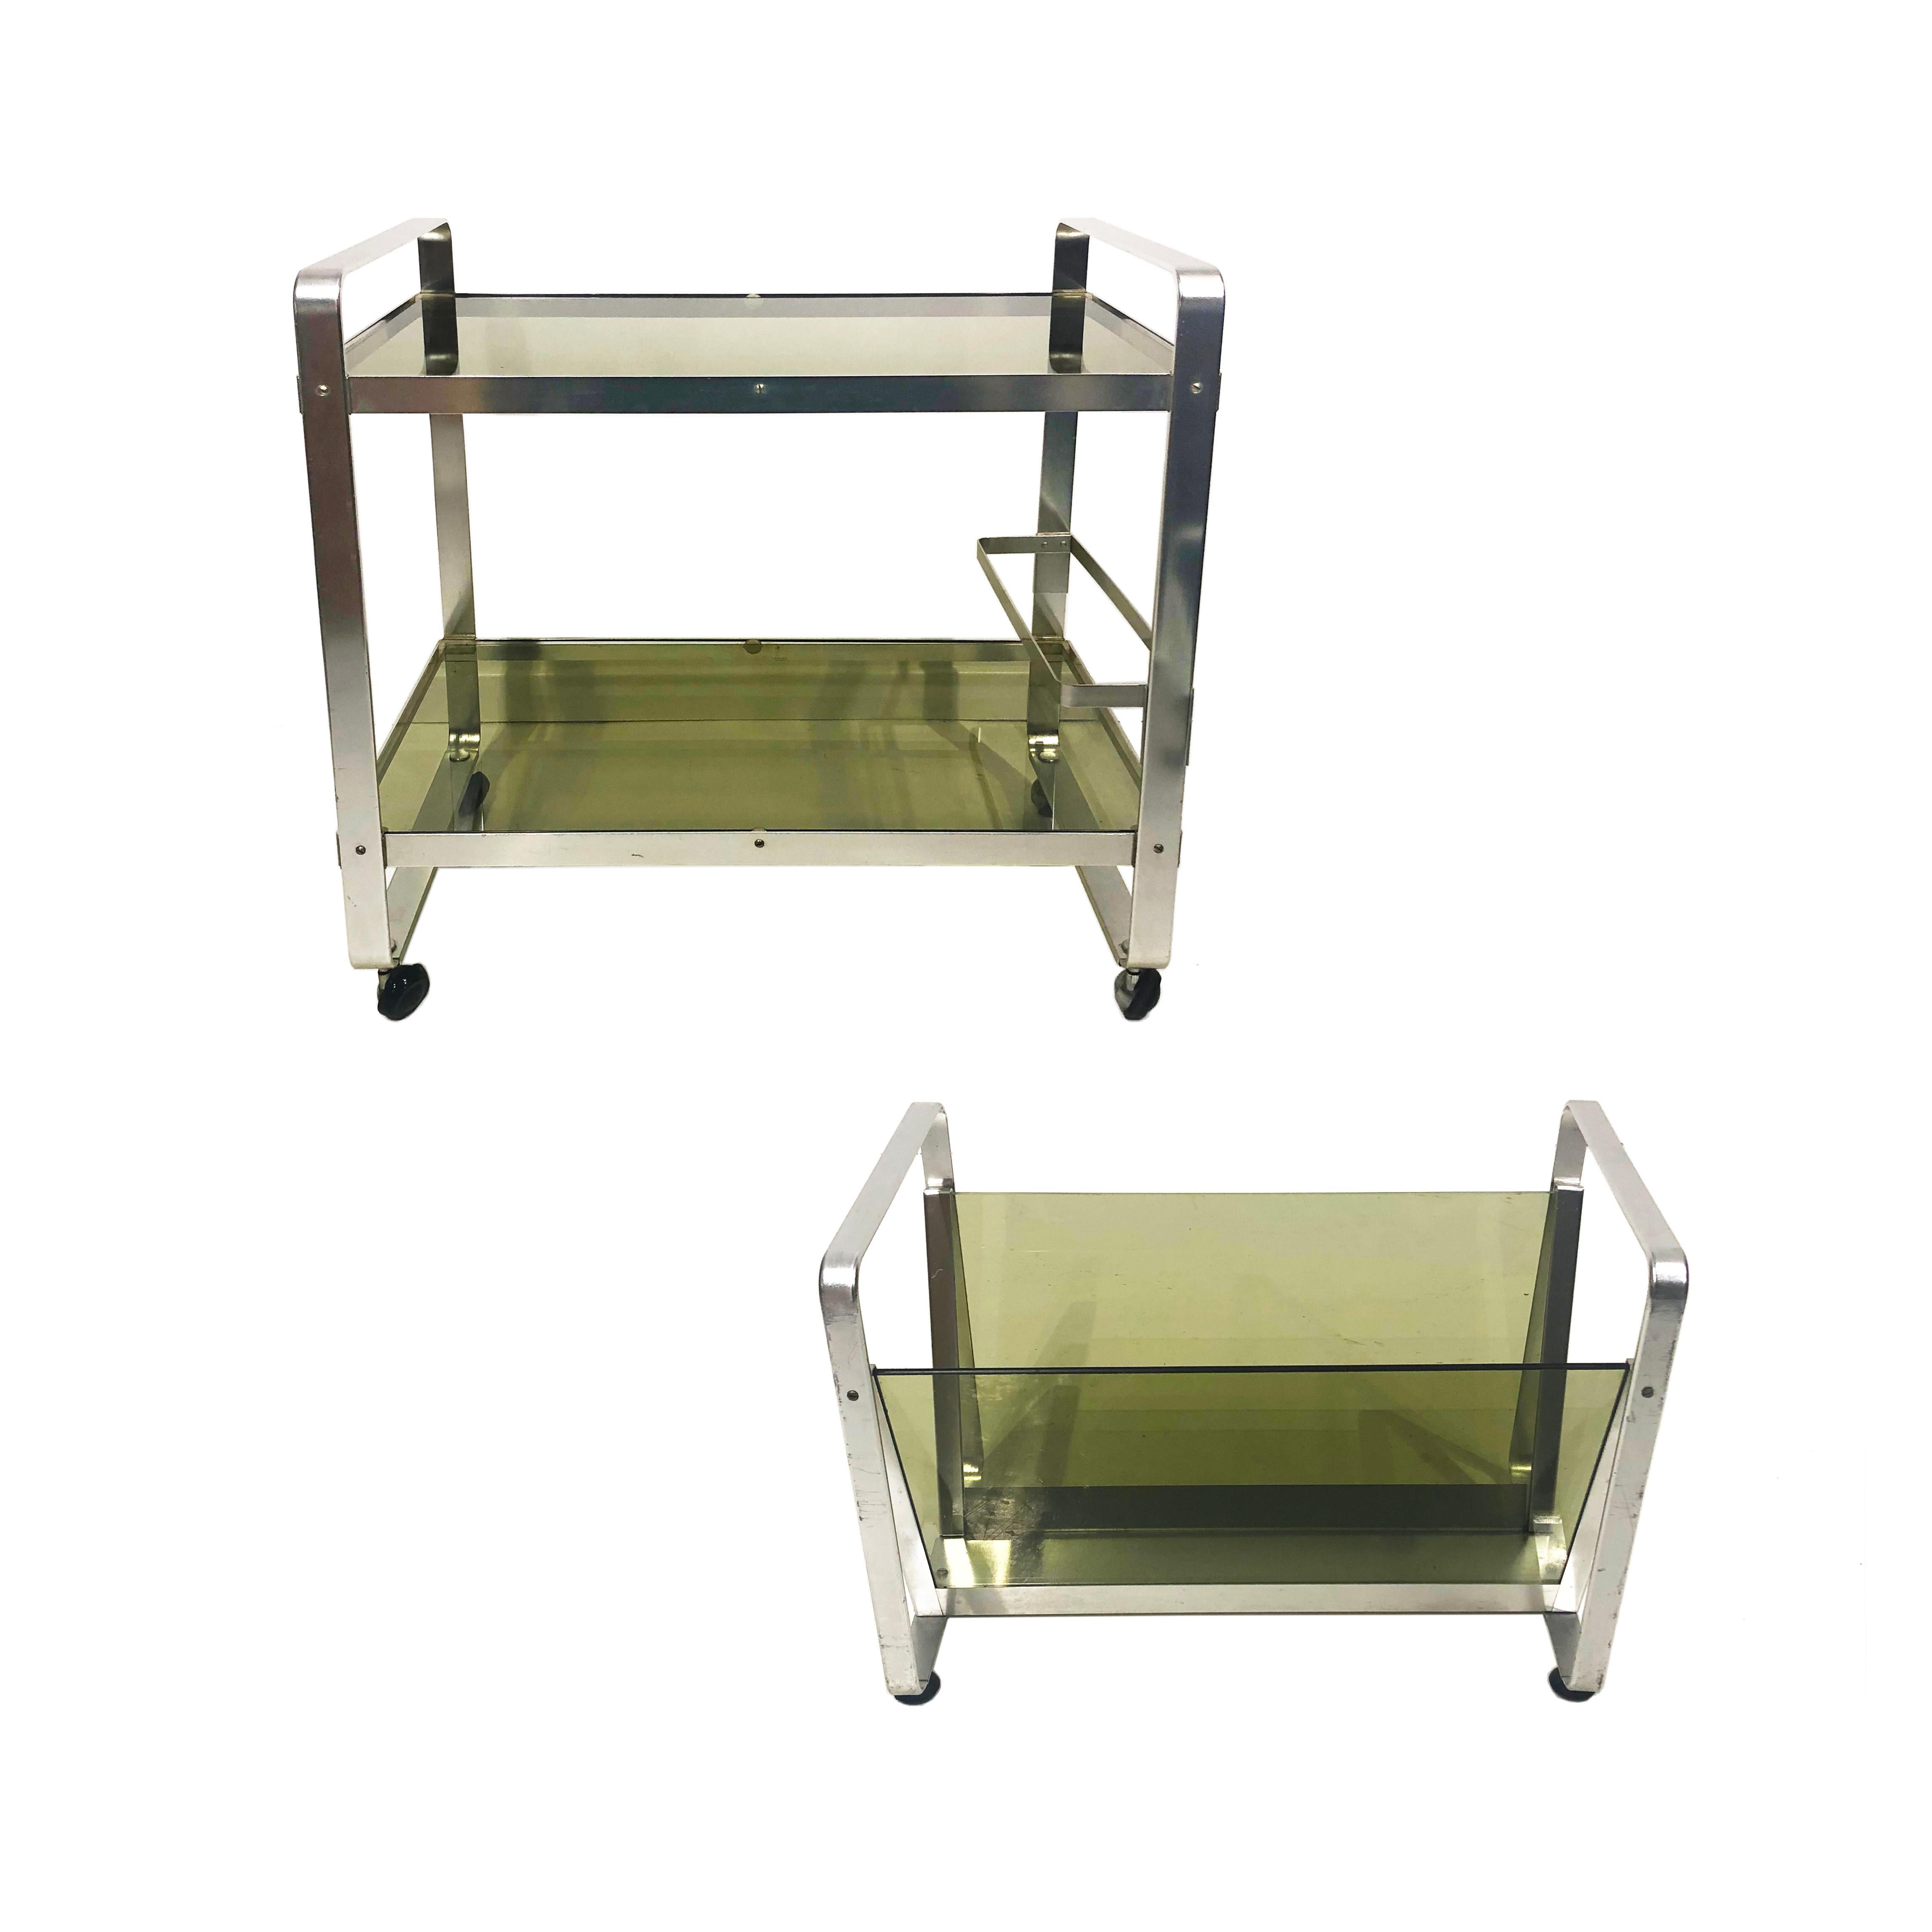 Space Age drinks bar cart in silver aluminium bended metal frame and smoked green glass on wheels. Light weight and smooth to take around with the bottles bar changing height. AV Handwerk sticker at the bottom of the card.